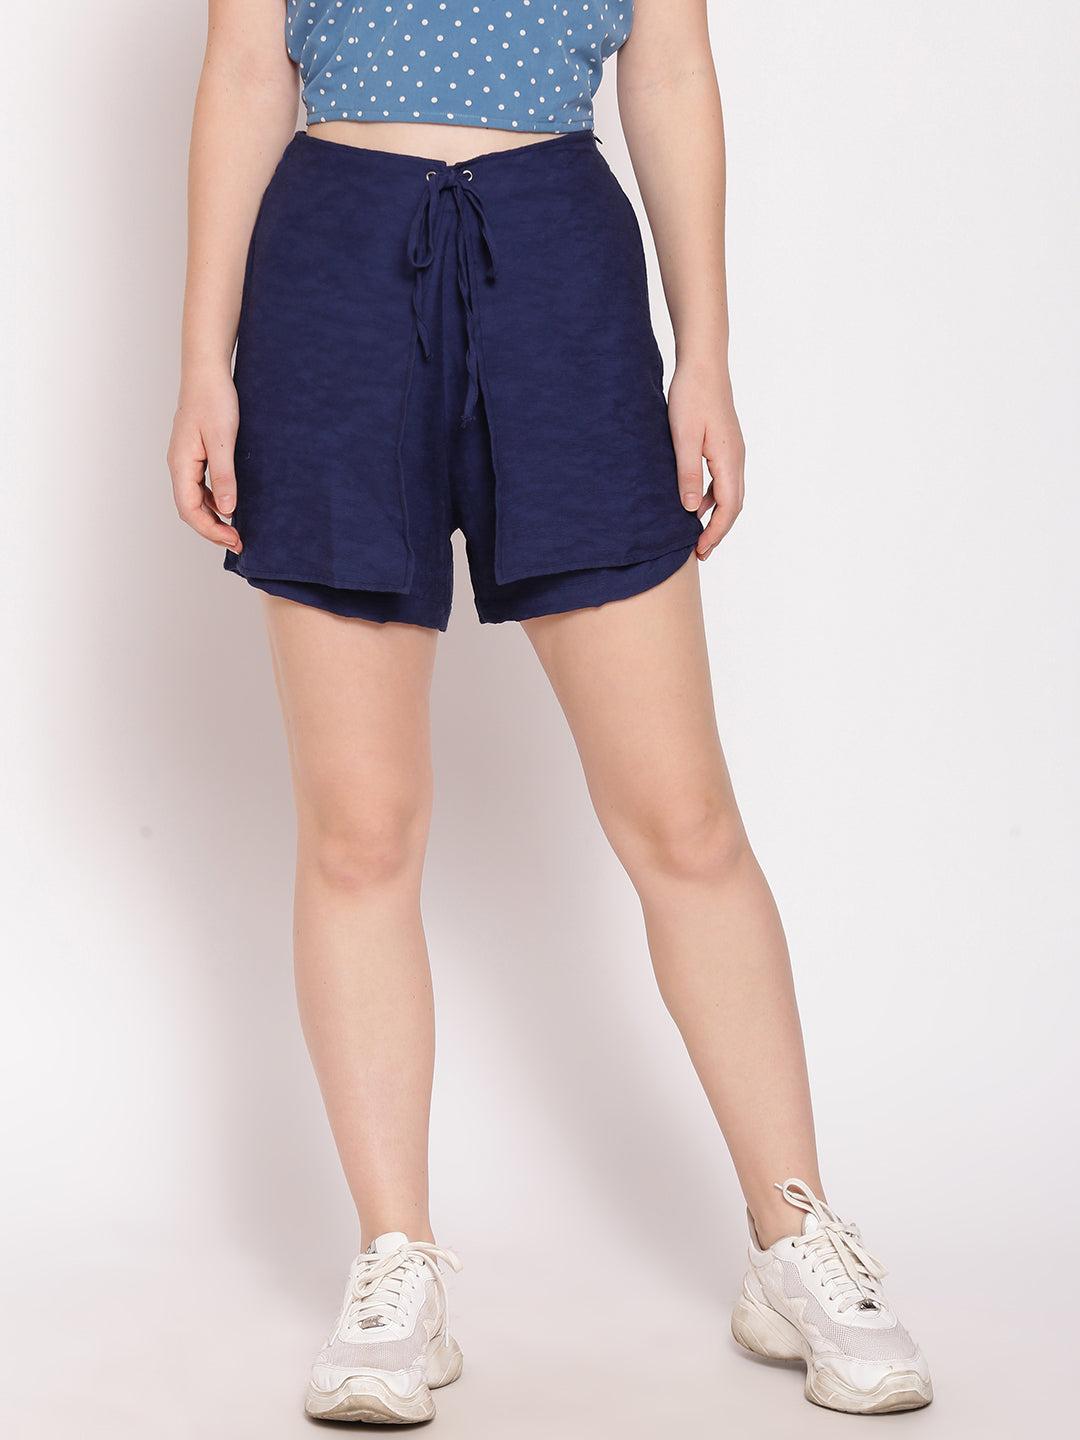 blue-solid-layered-shorts-for-women